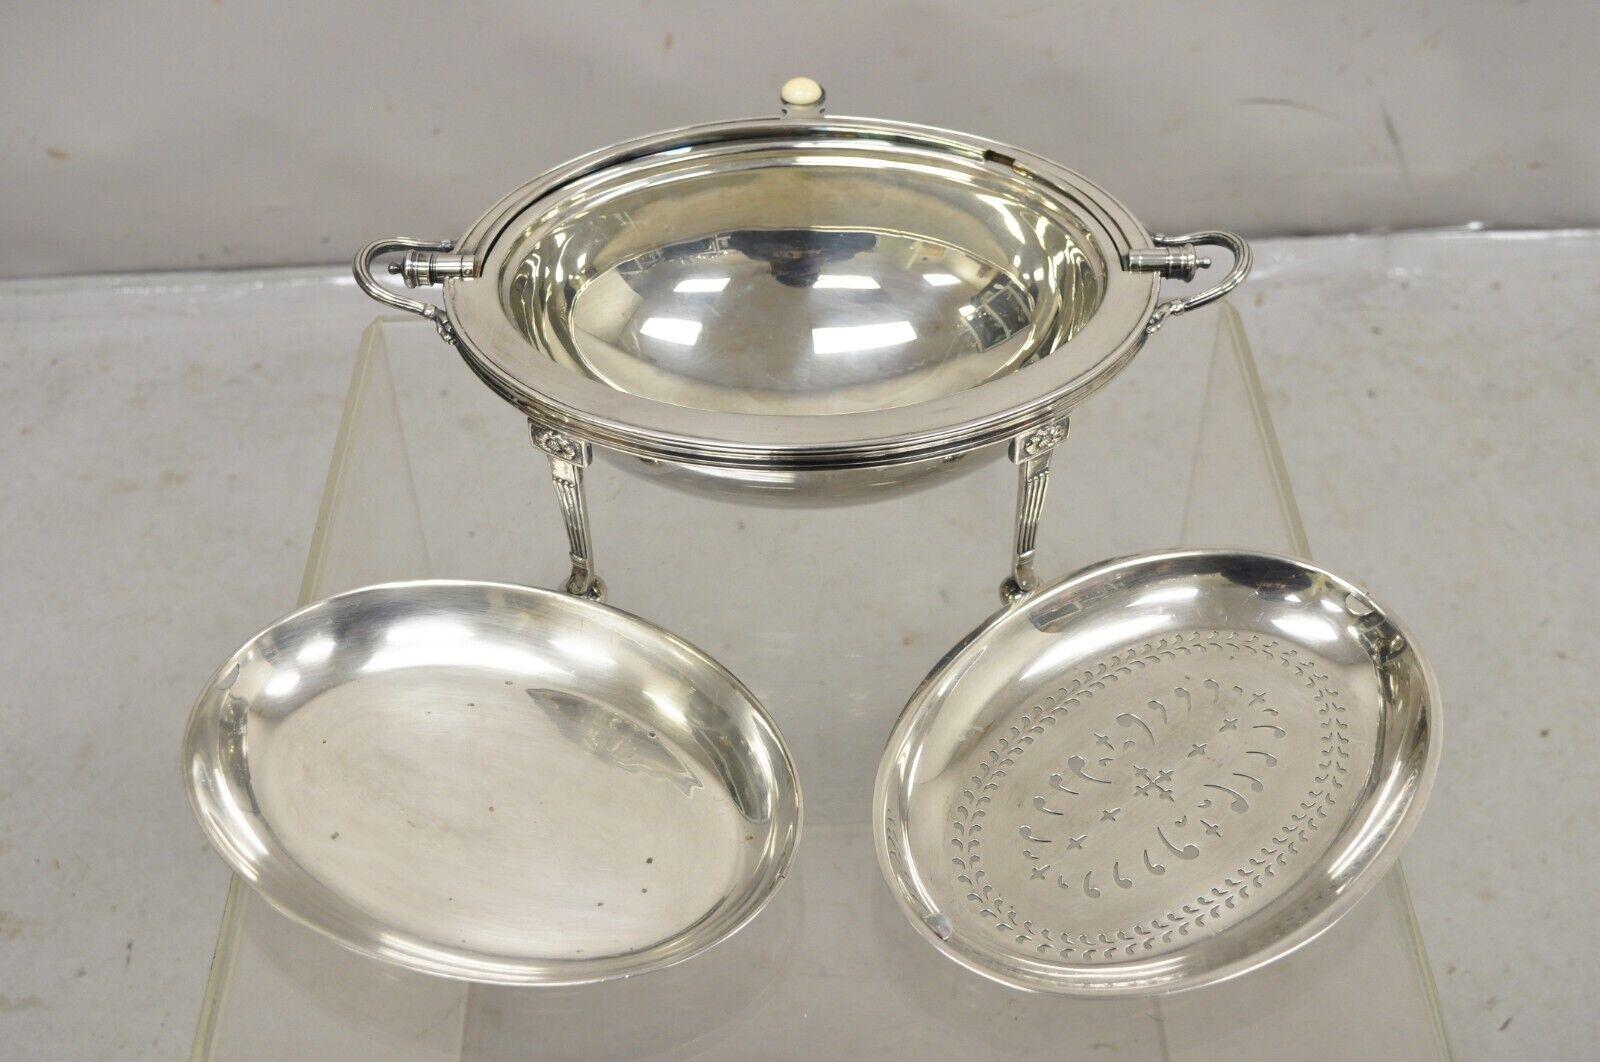 English Regency Silver Plated RF E & CO L Revolving Dome Chafing Dish Warmer In Good Condition For Sale In Philadelphia, PA